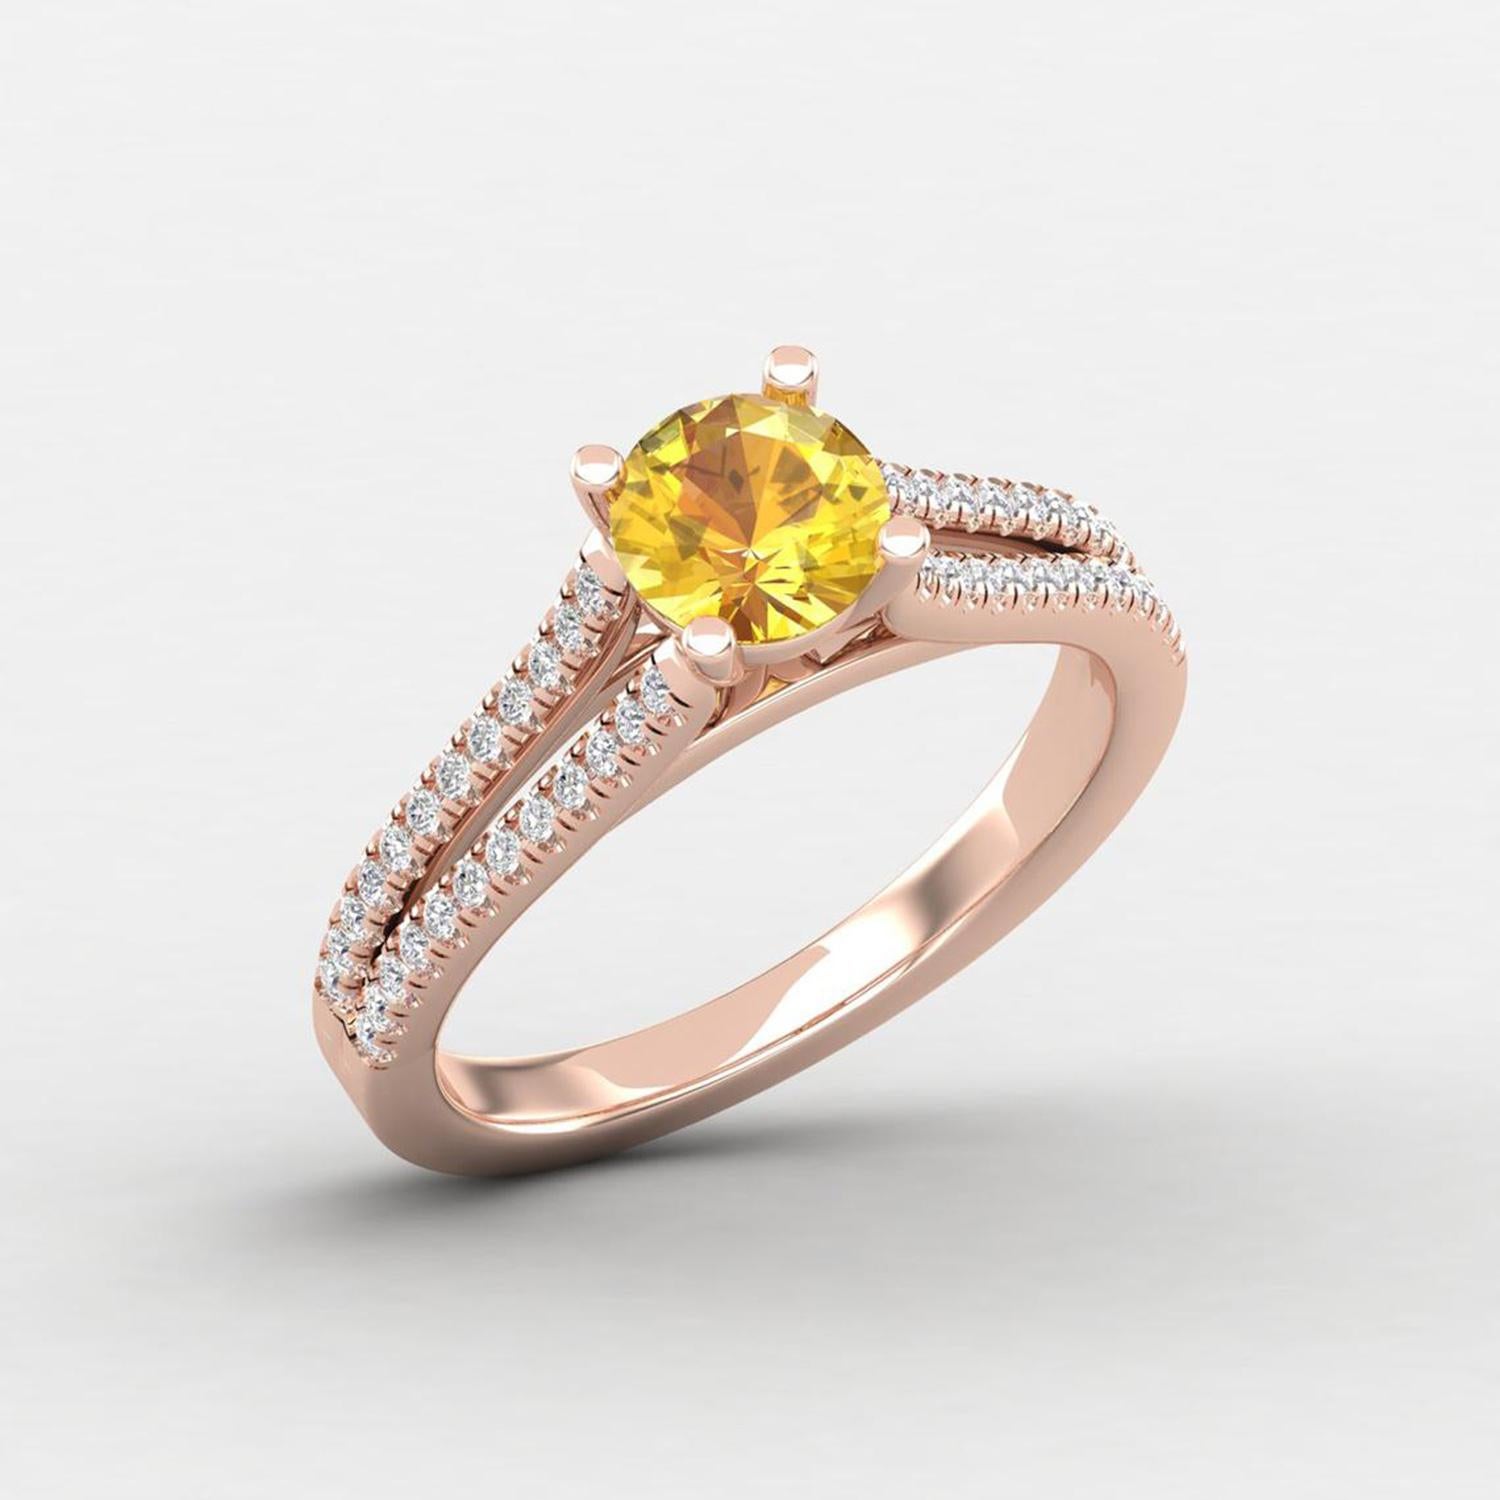 Women's 14 Karat Gold Yellow Sapphire Ring / Diamond Solitaire Ring / Ring for Her For Sale